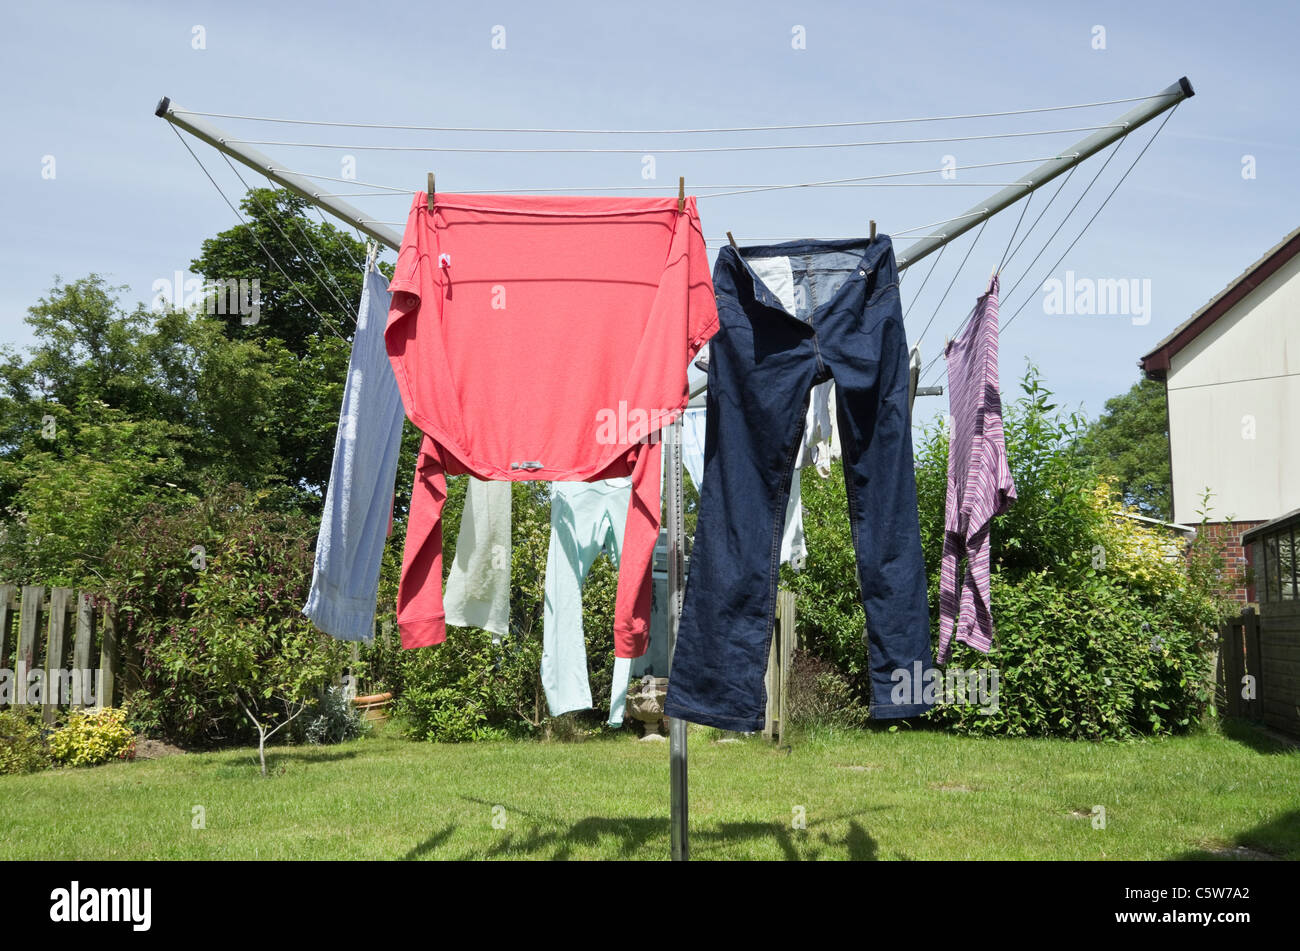 Household wet clothes hanging out on a rotary washing line to dry outdoors in a domestic garden on a warm sunny day. UK, Britain. Stock Photo